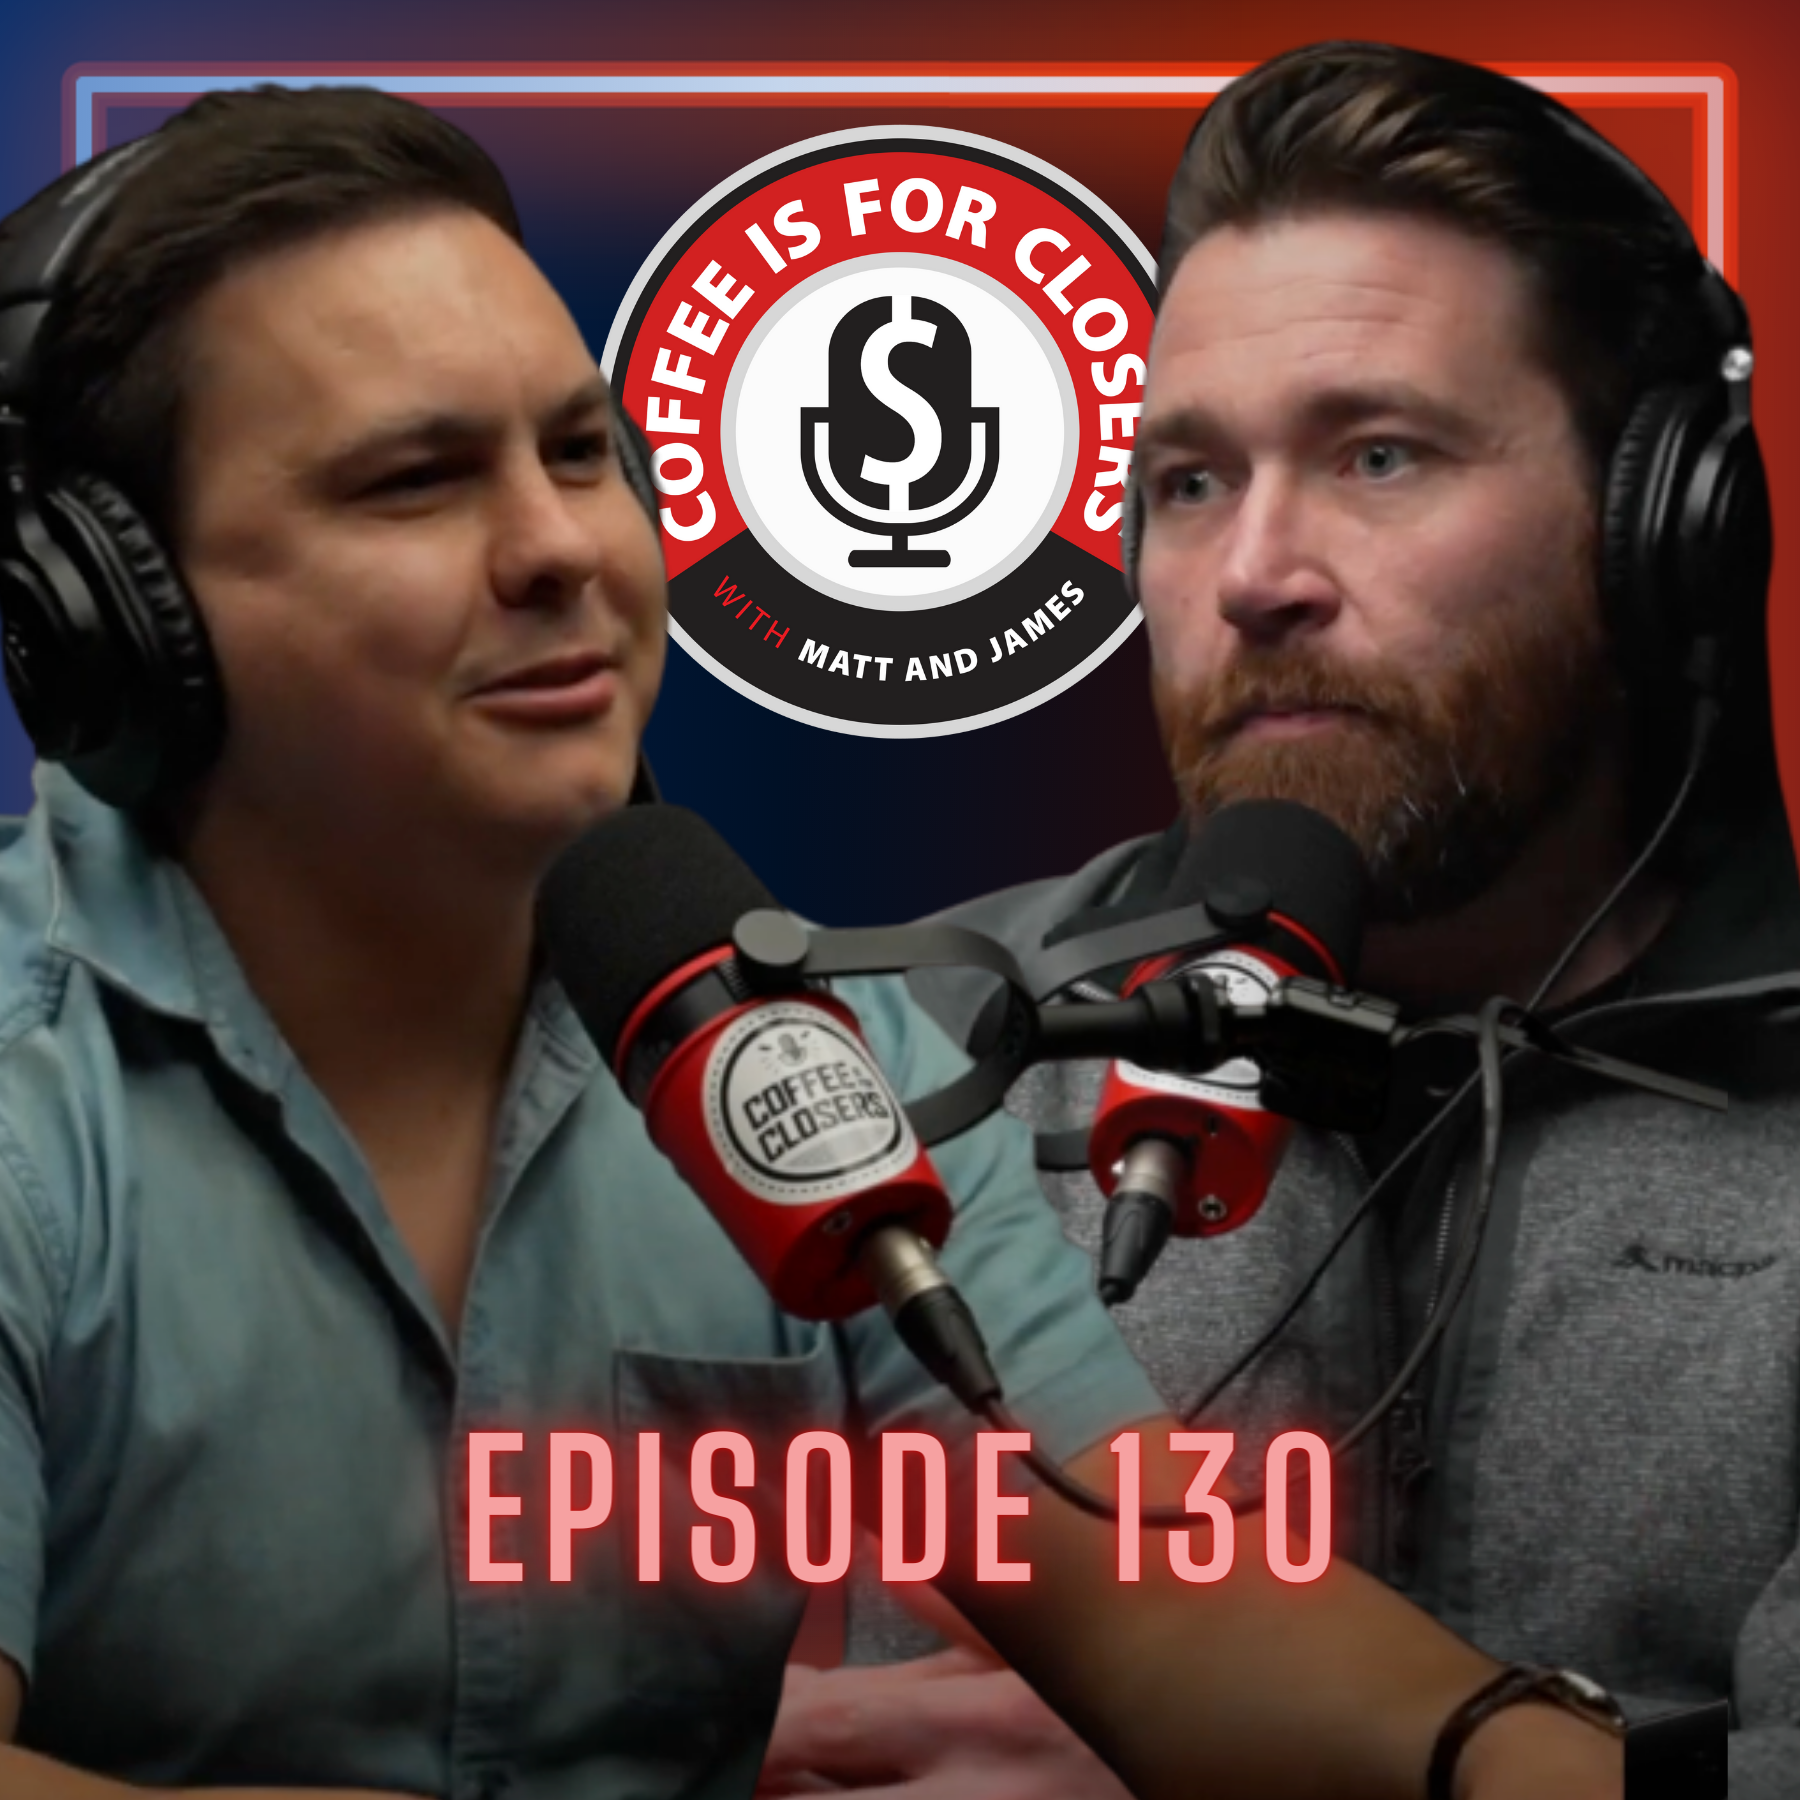 Behind the scenes at a sales agency - CISF Episode 130